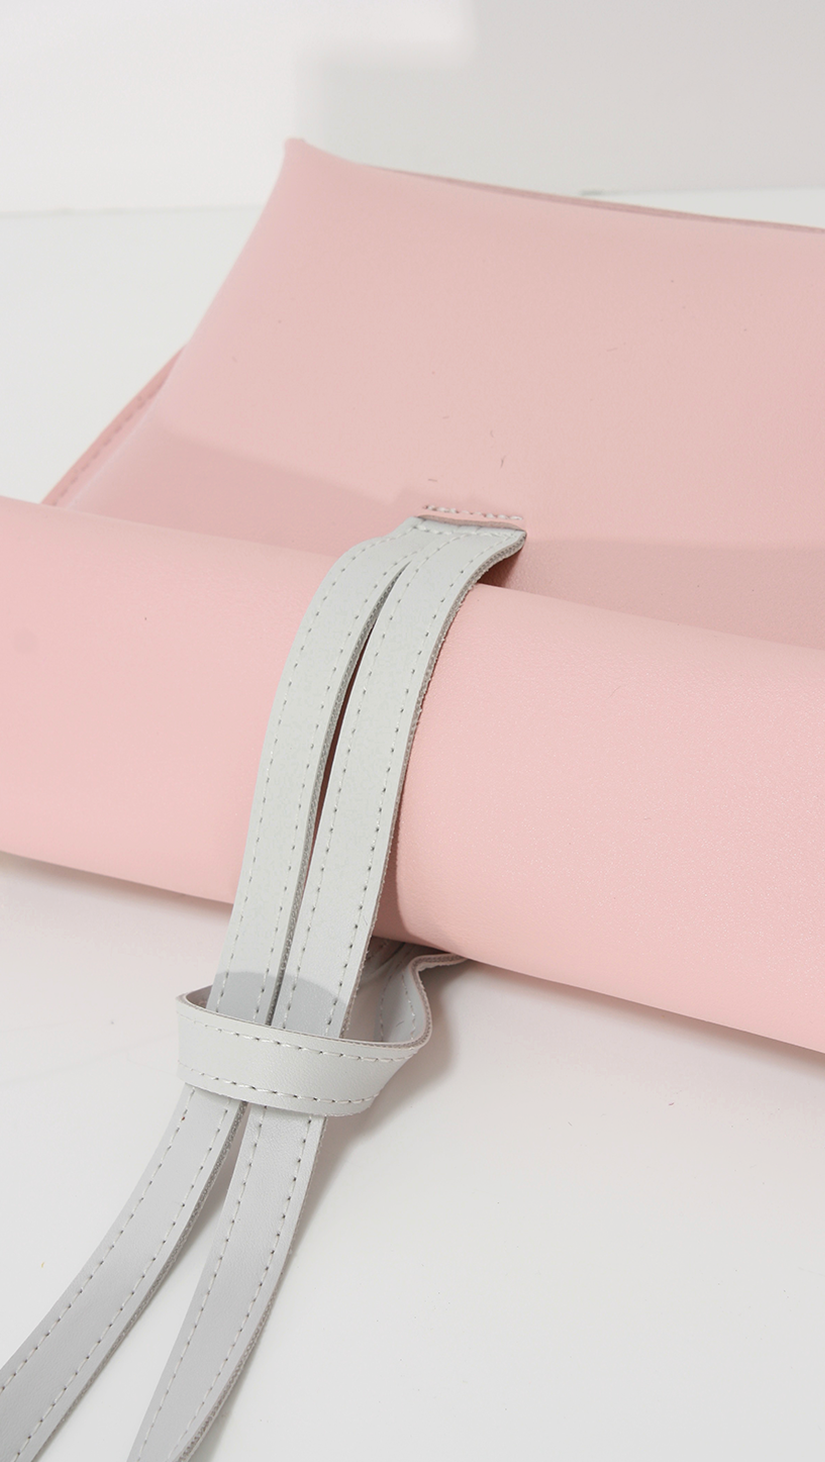 Melgar Cluth, a lightweight smooth pu leather with minimal styling in Pink.